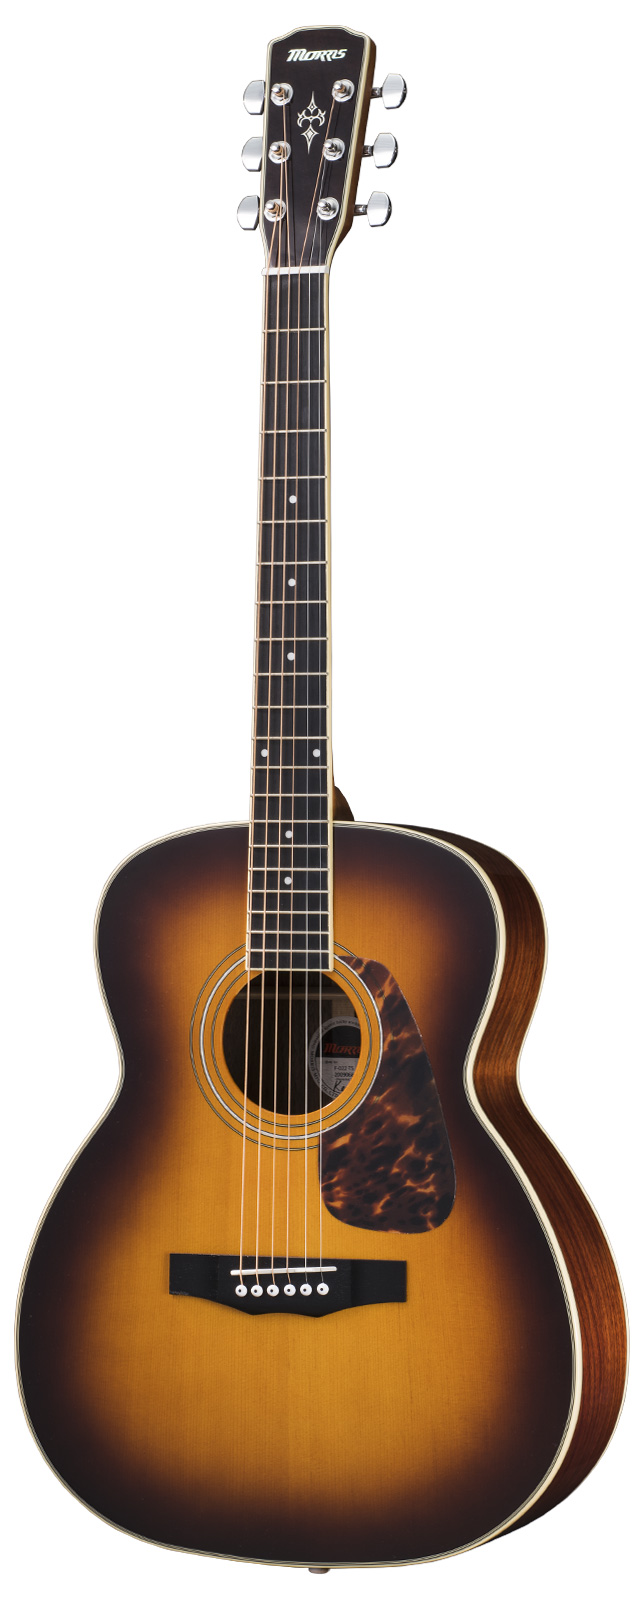 F-022 | PERFORMERS EDITION | MORRIS GUITARS モーリスギター